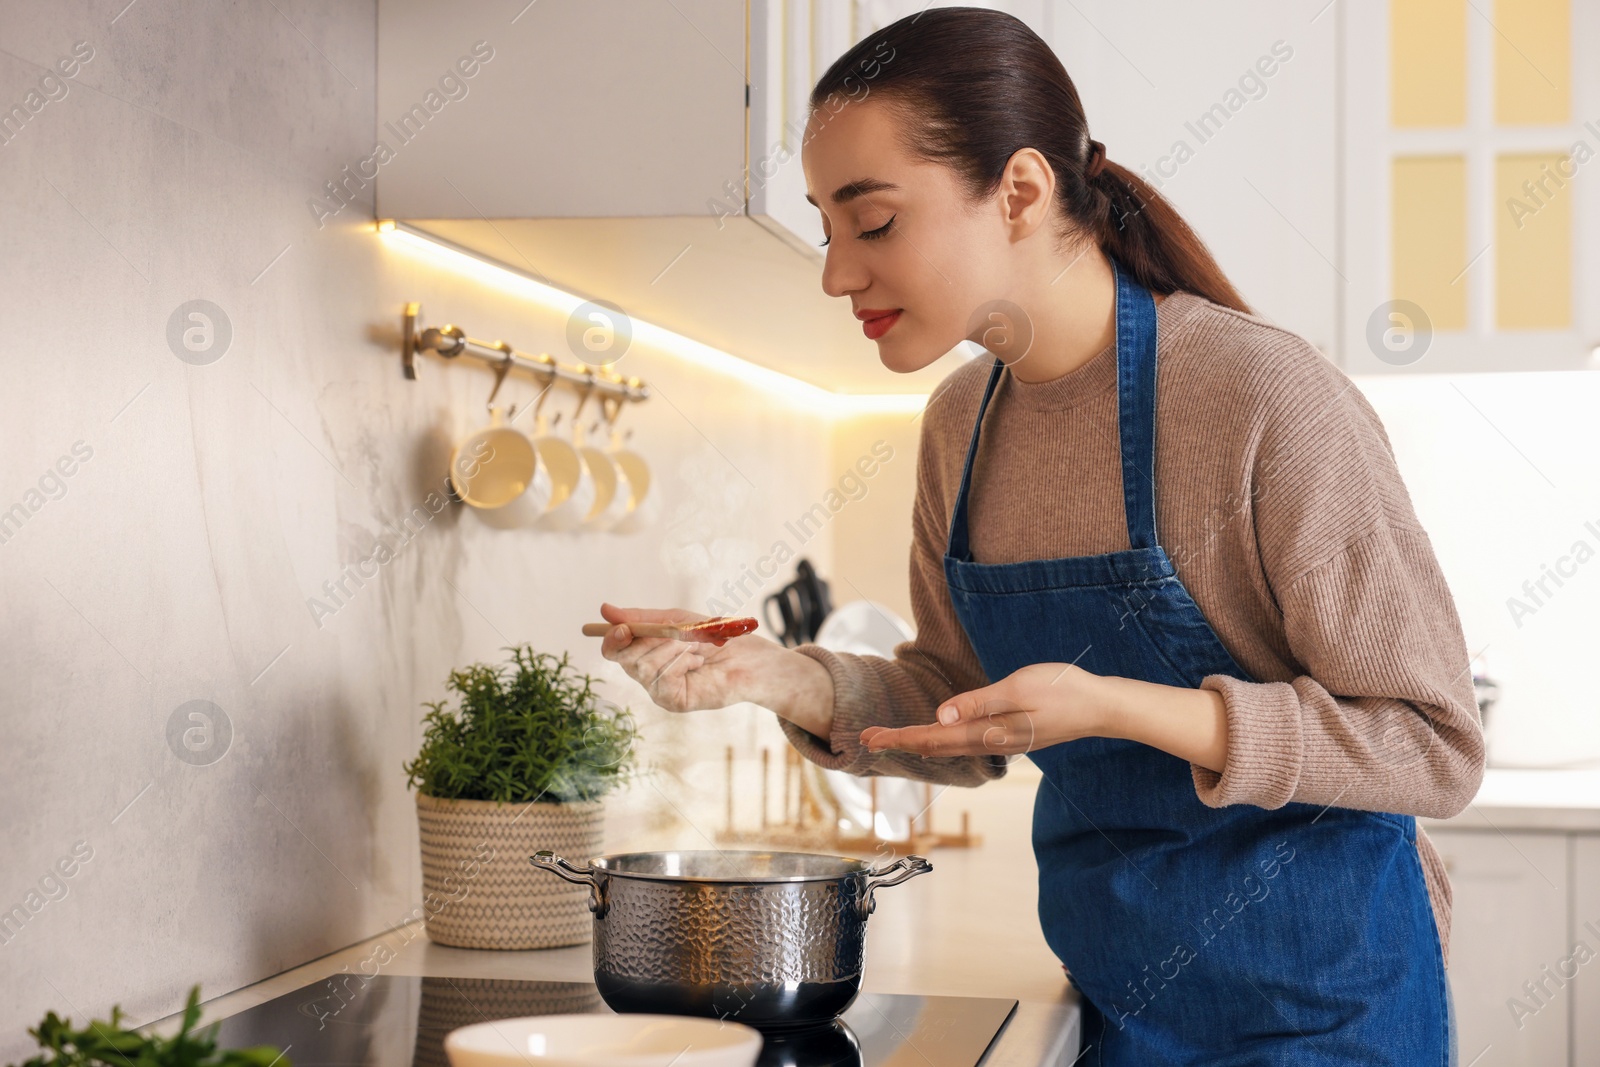 Photo of Smiling woman with wooden spoon tasting tomato soup in kitchen. Space for text